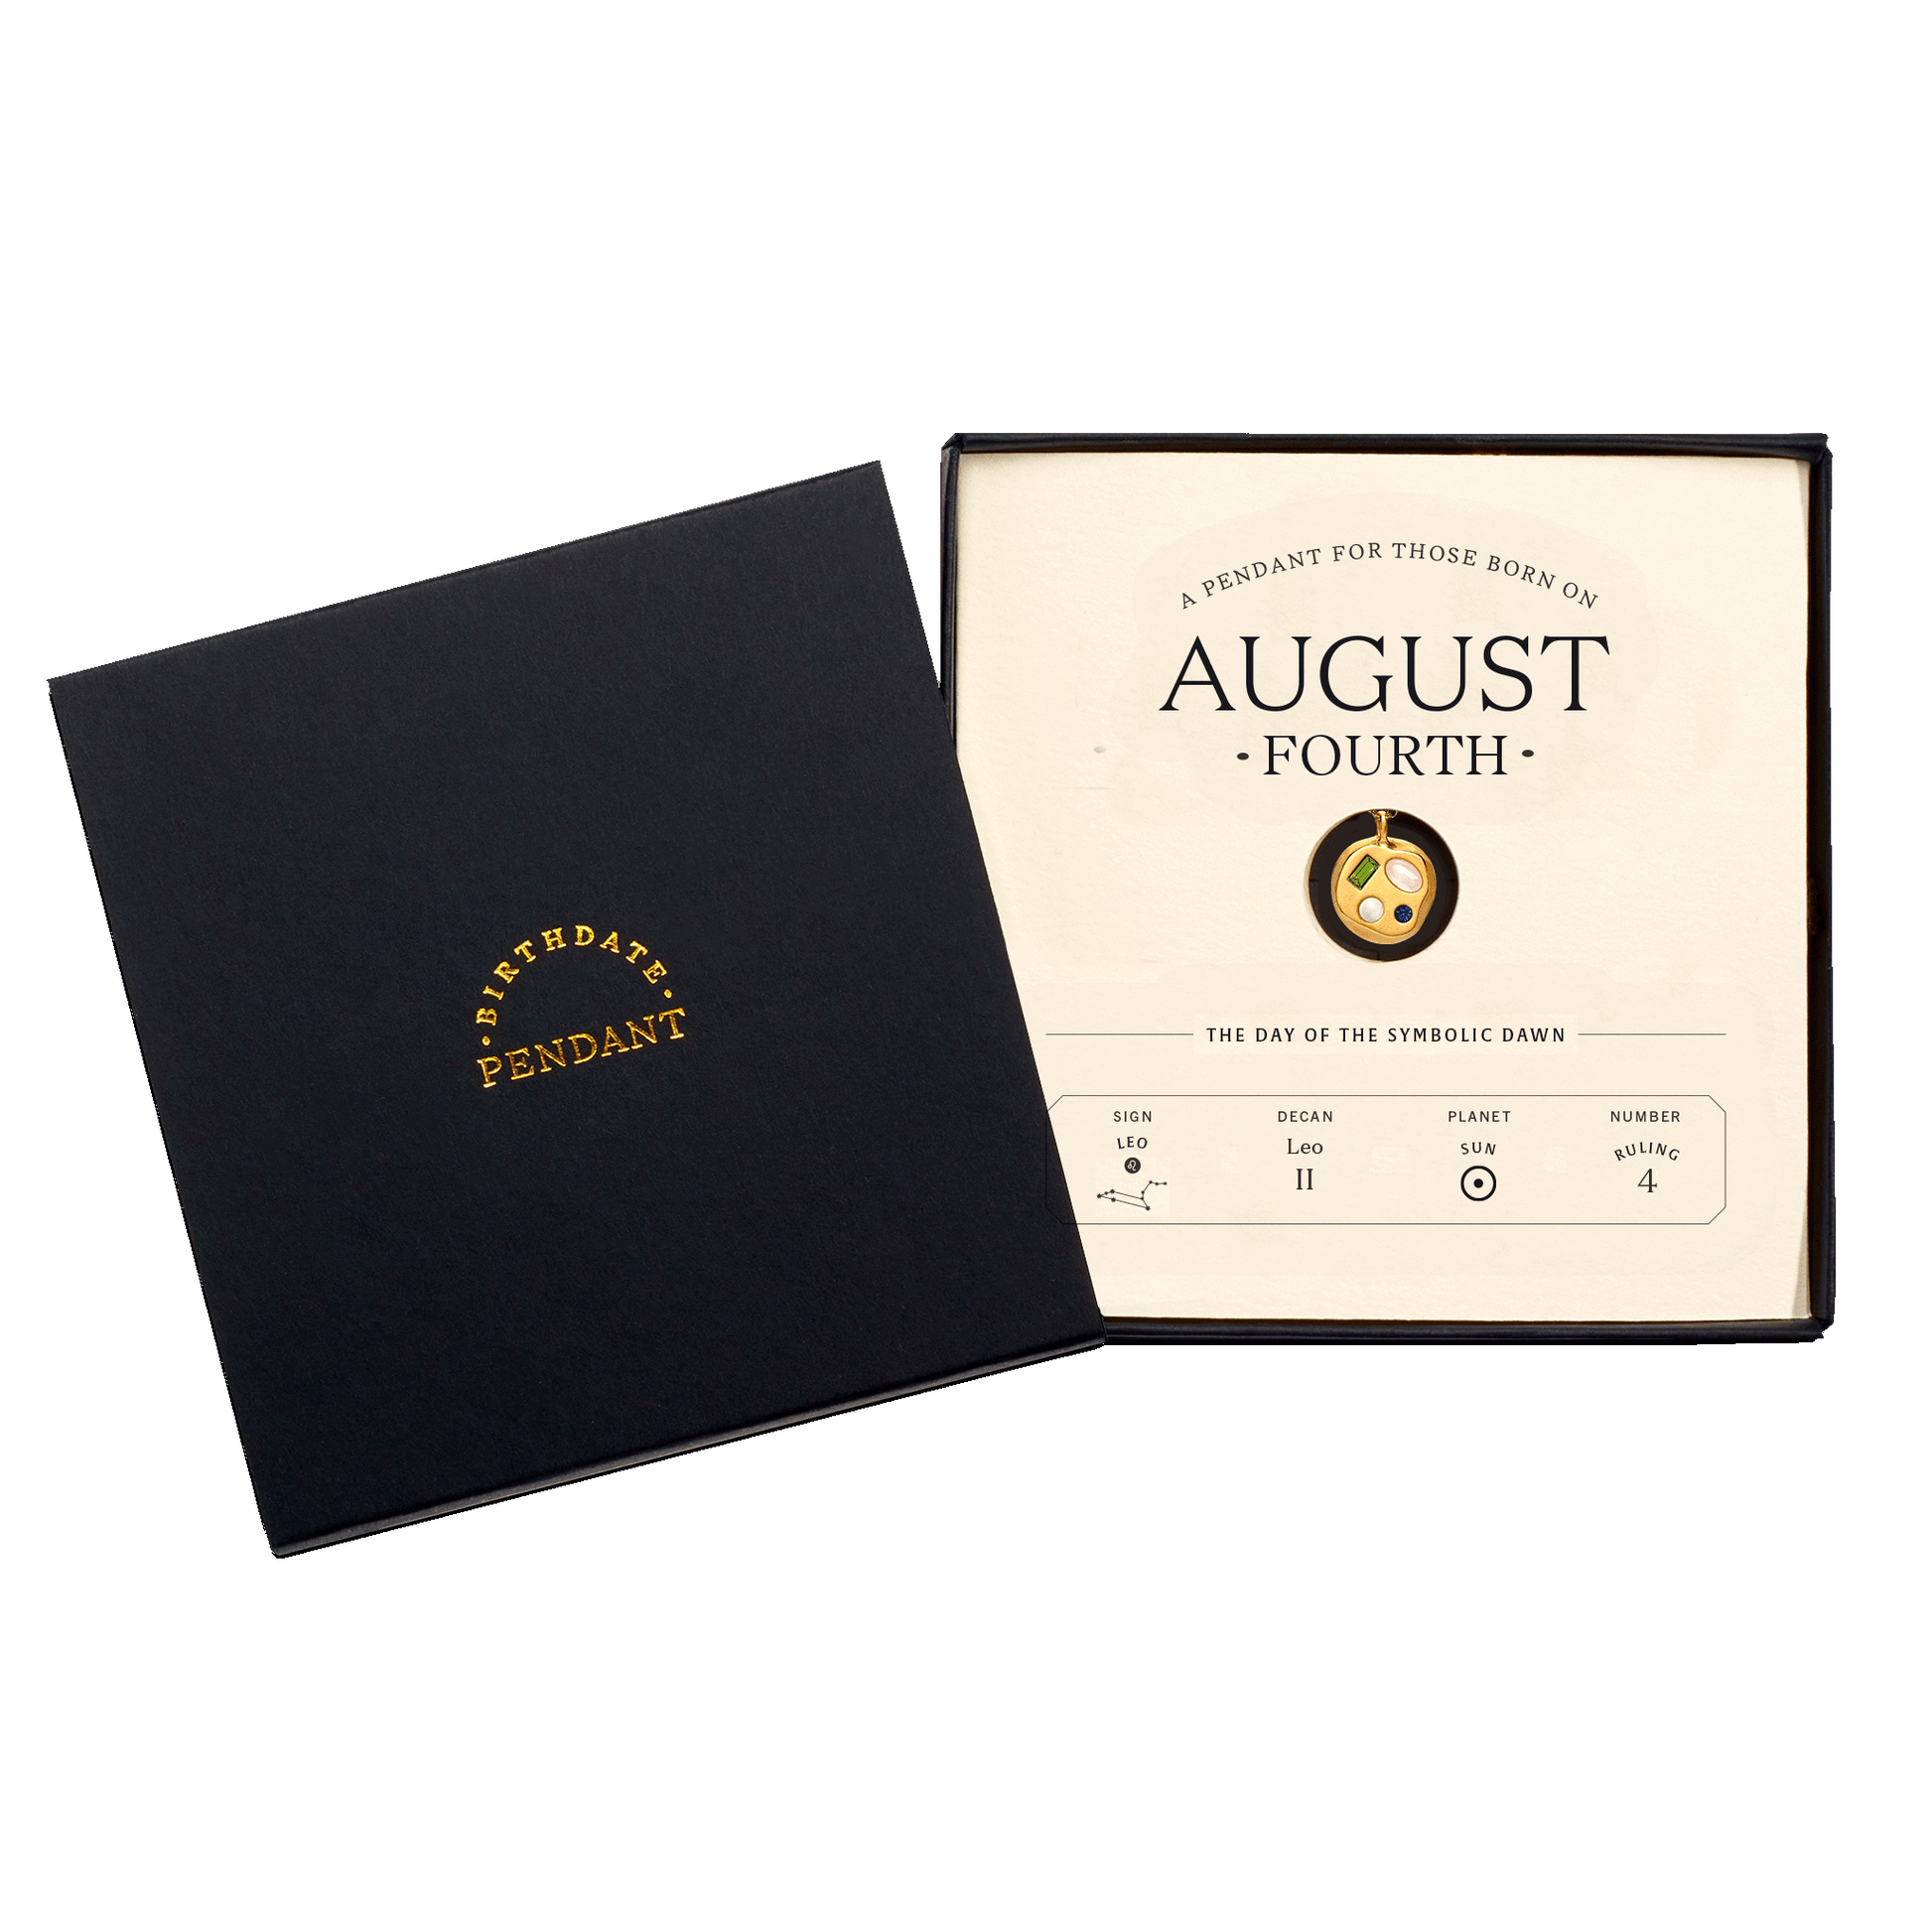 The August Fourth Pendant inside its box